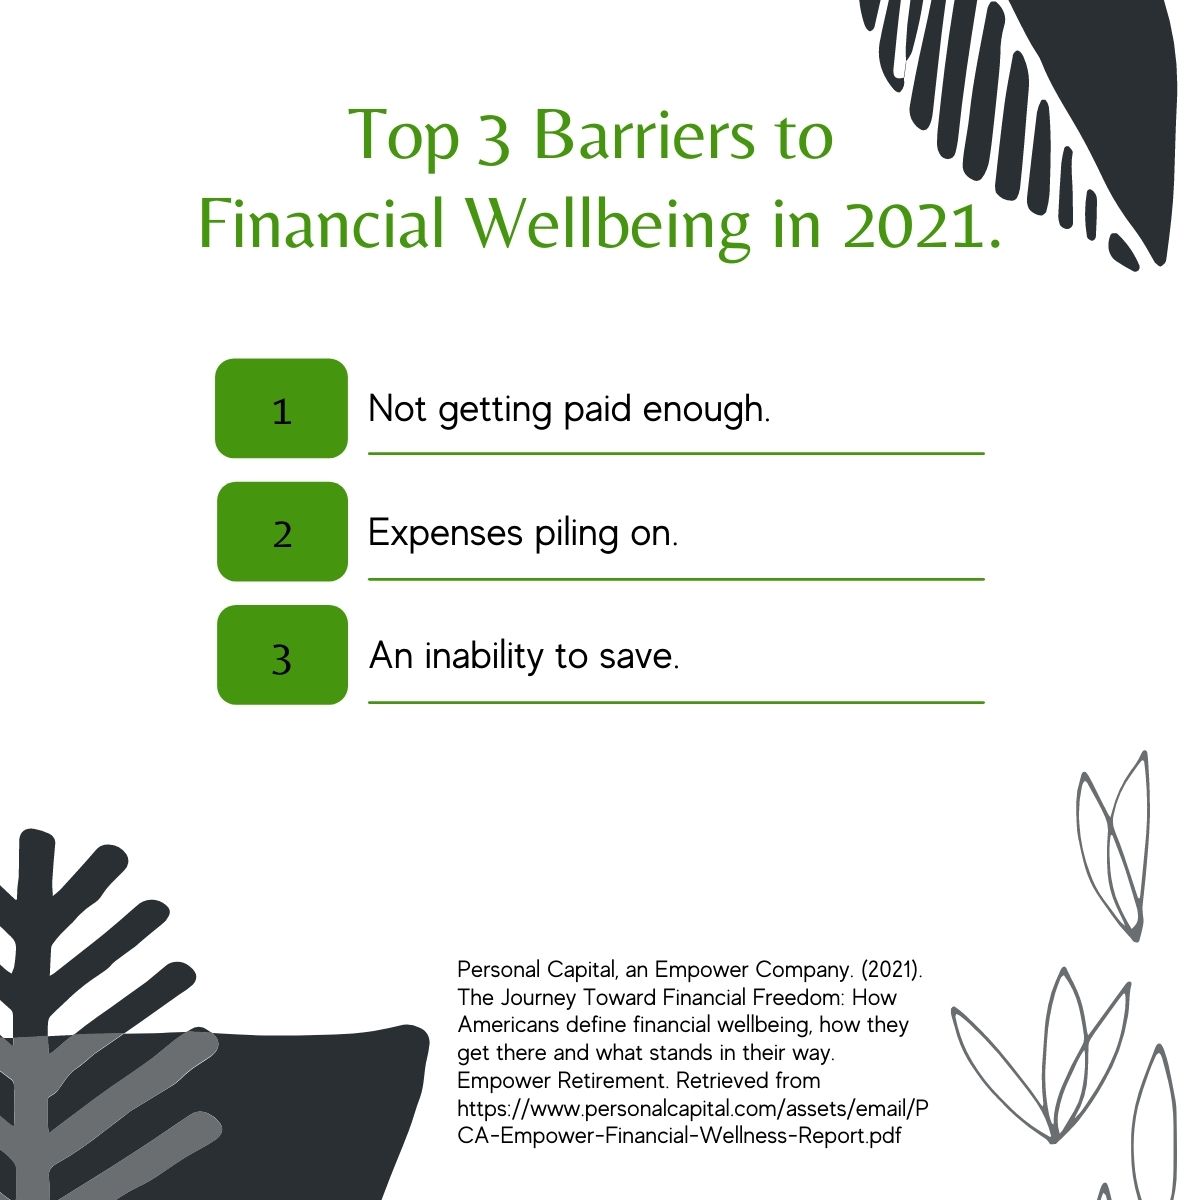 Top 3 barriers to financial wellbeing in 2021